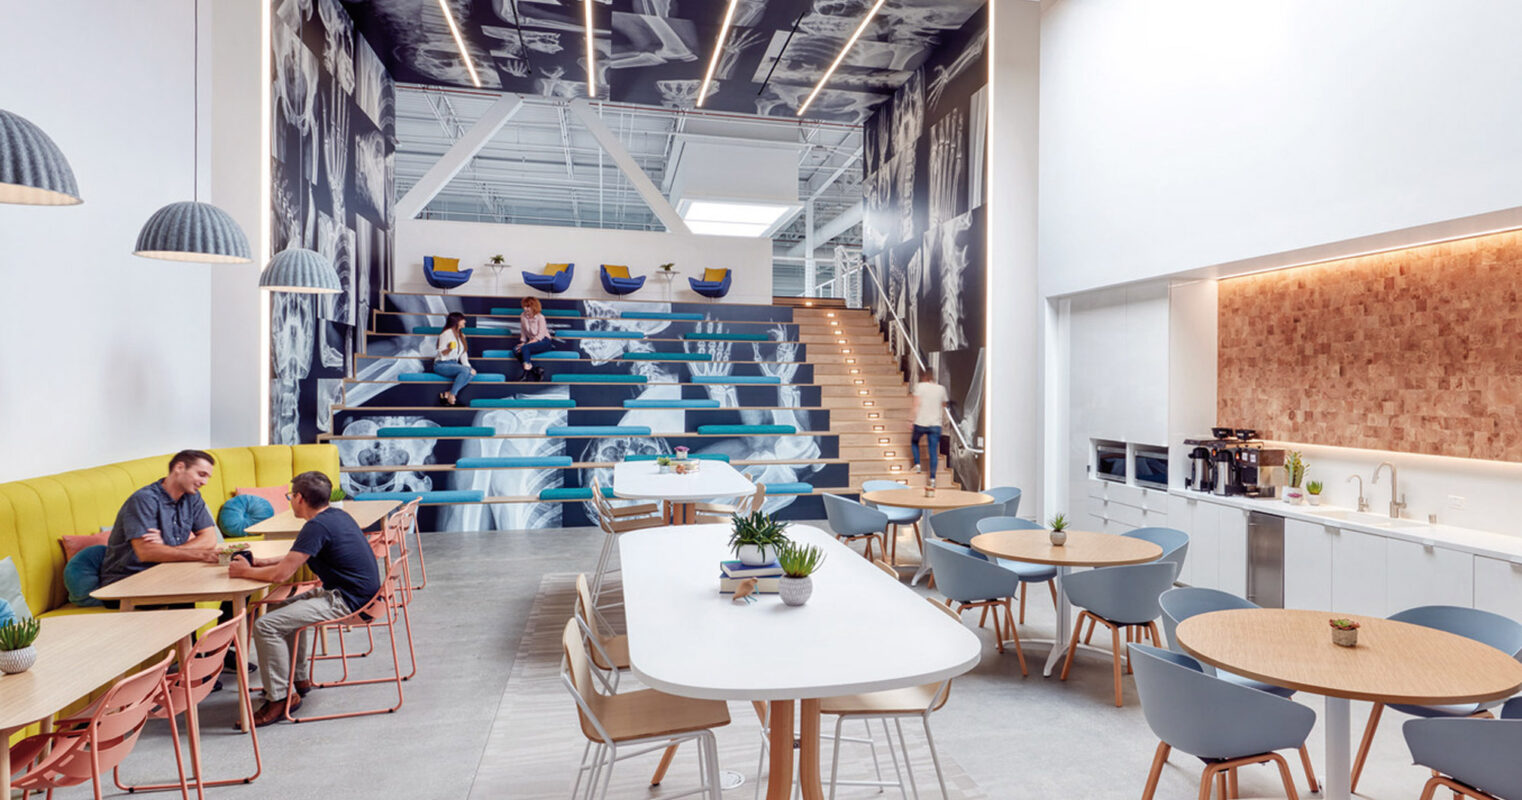 Modern office break room featuring eclectic furnishings, pastel hues, and a staircase doubling as auditorium seating with a large monochrome mural enhancing the vertical space. Natural light brightens wood tonality and reflective surfaces, fostering a dynamic communal ambiance.